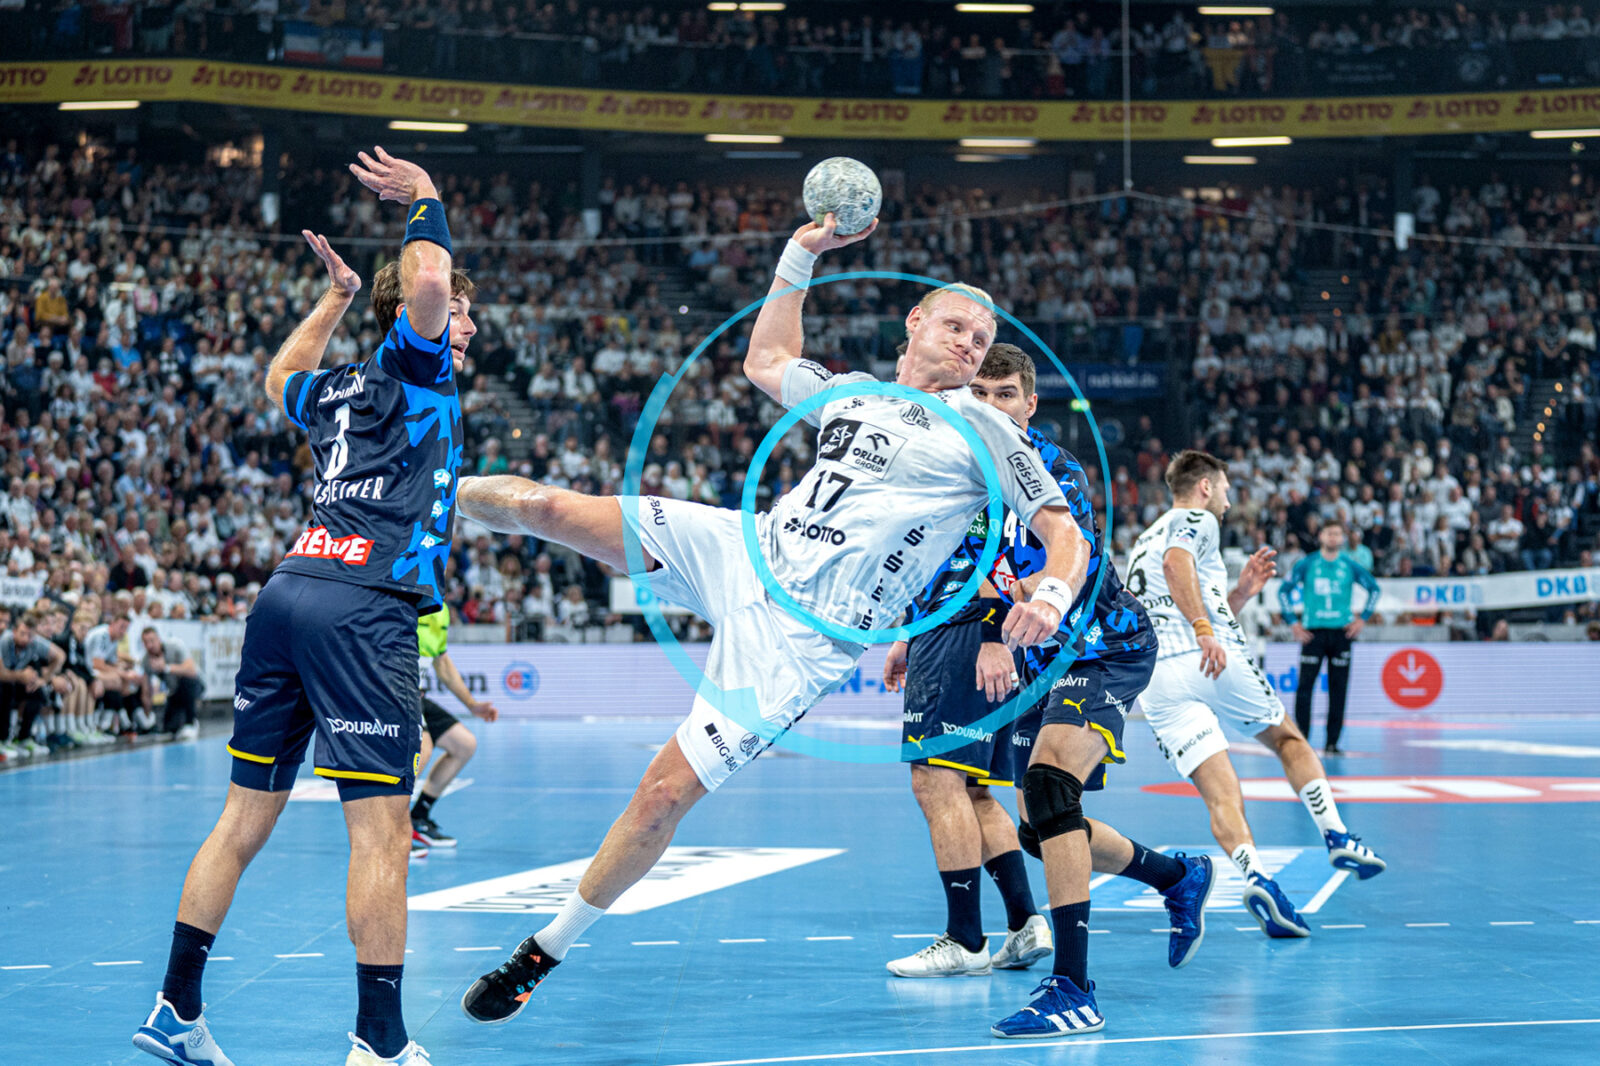 KINEXON is a sports analytics company that is one of the leading provider in the world of handball analytics and sports data.